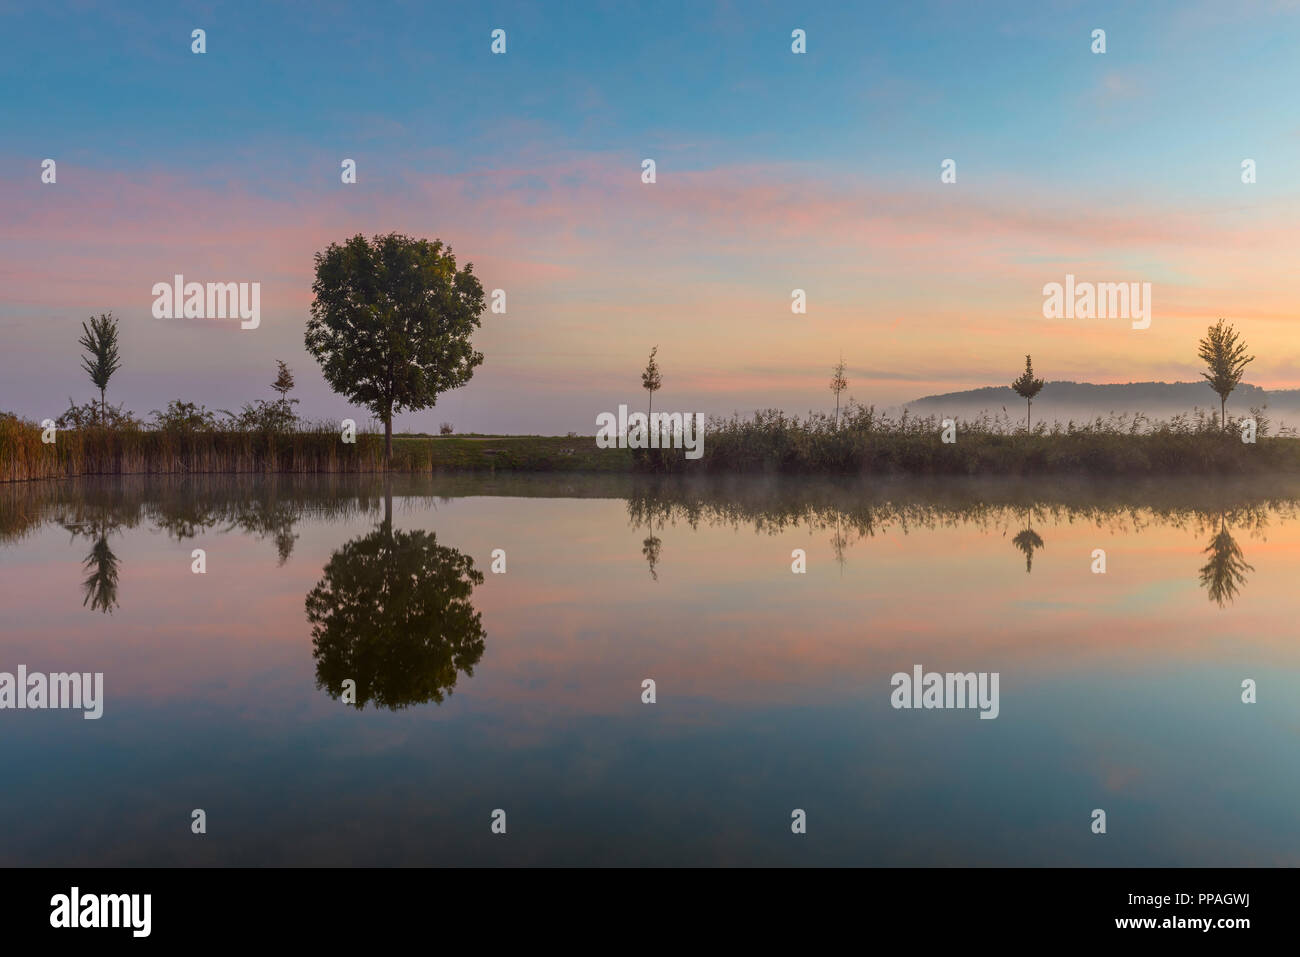 Landscape with Trees Reflecting in Lake at Dawn, Drei Gleichen, Ilm District, Thuringia, Germany Stock Photo